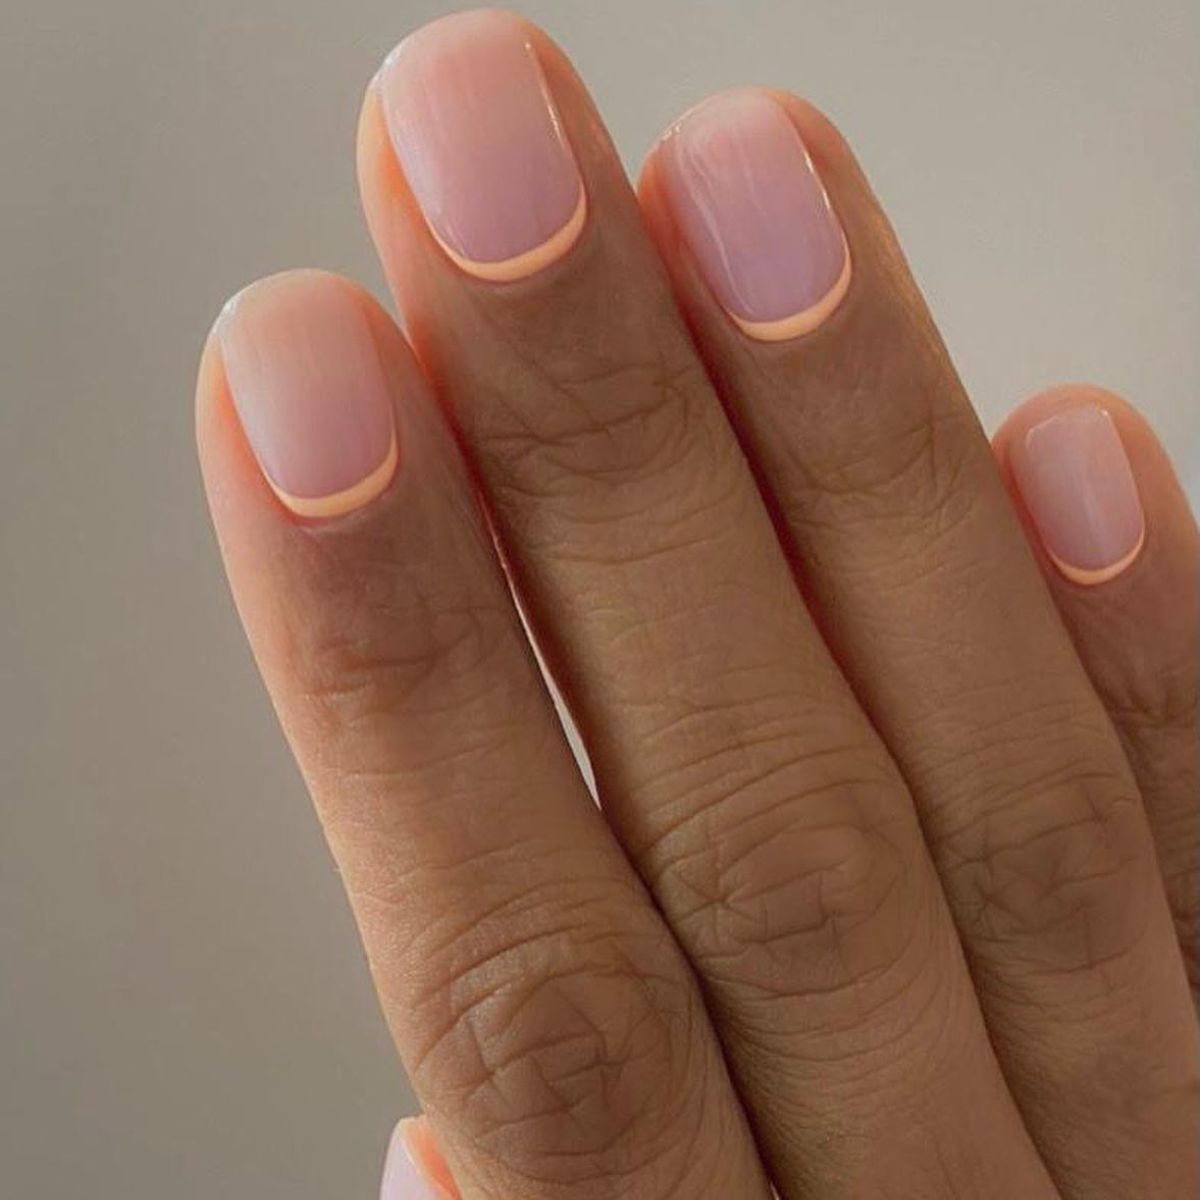 Best Summer Nail Colors — Trendy Nail Shades for 2022